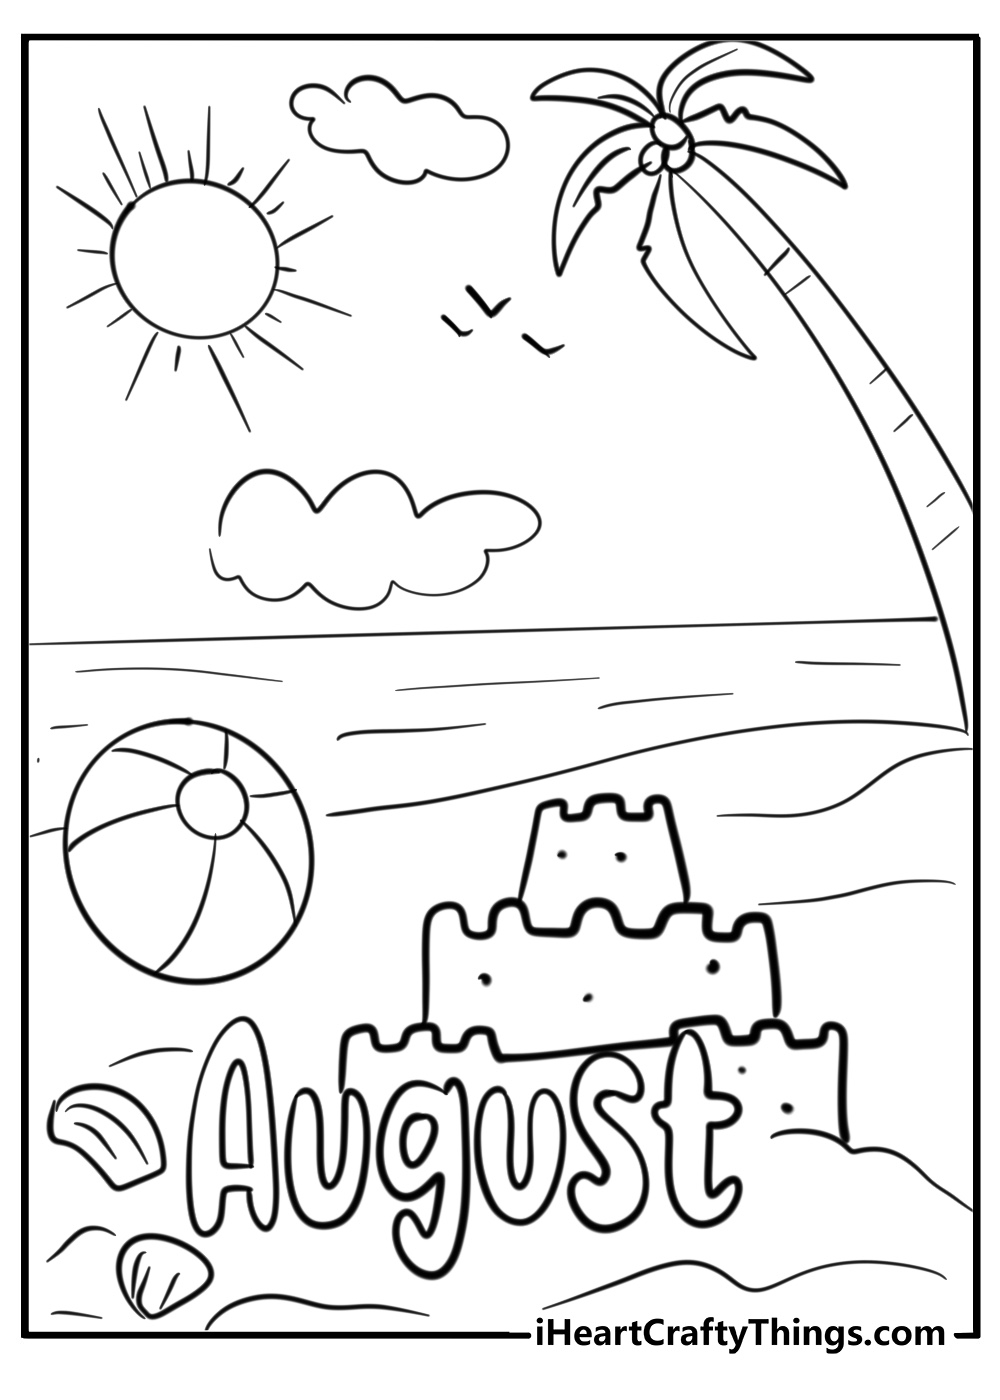 Free august coloring page